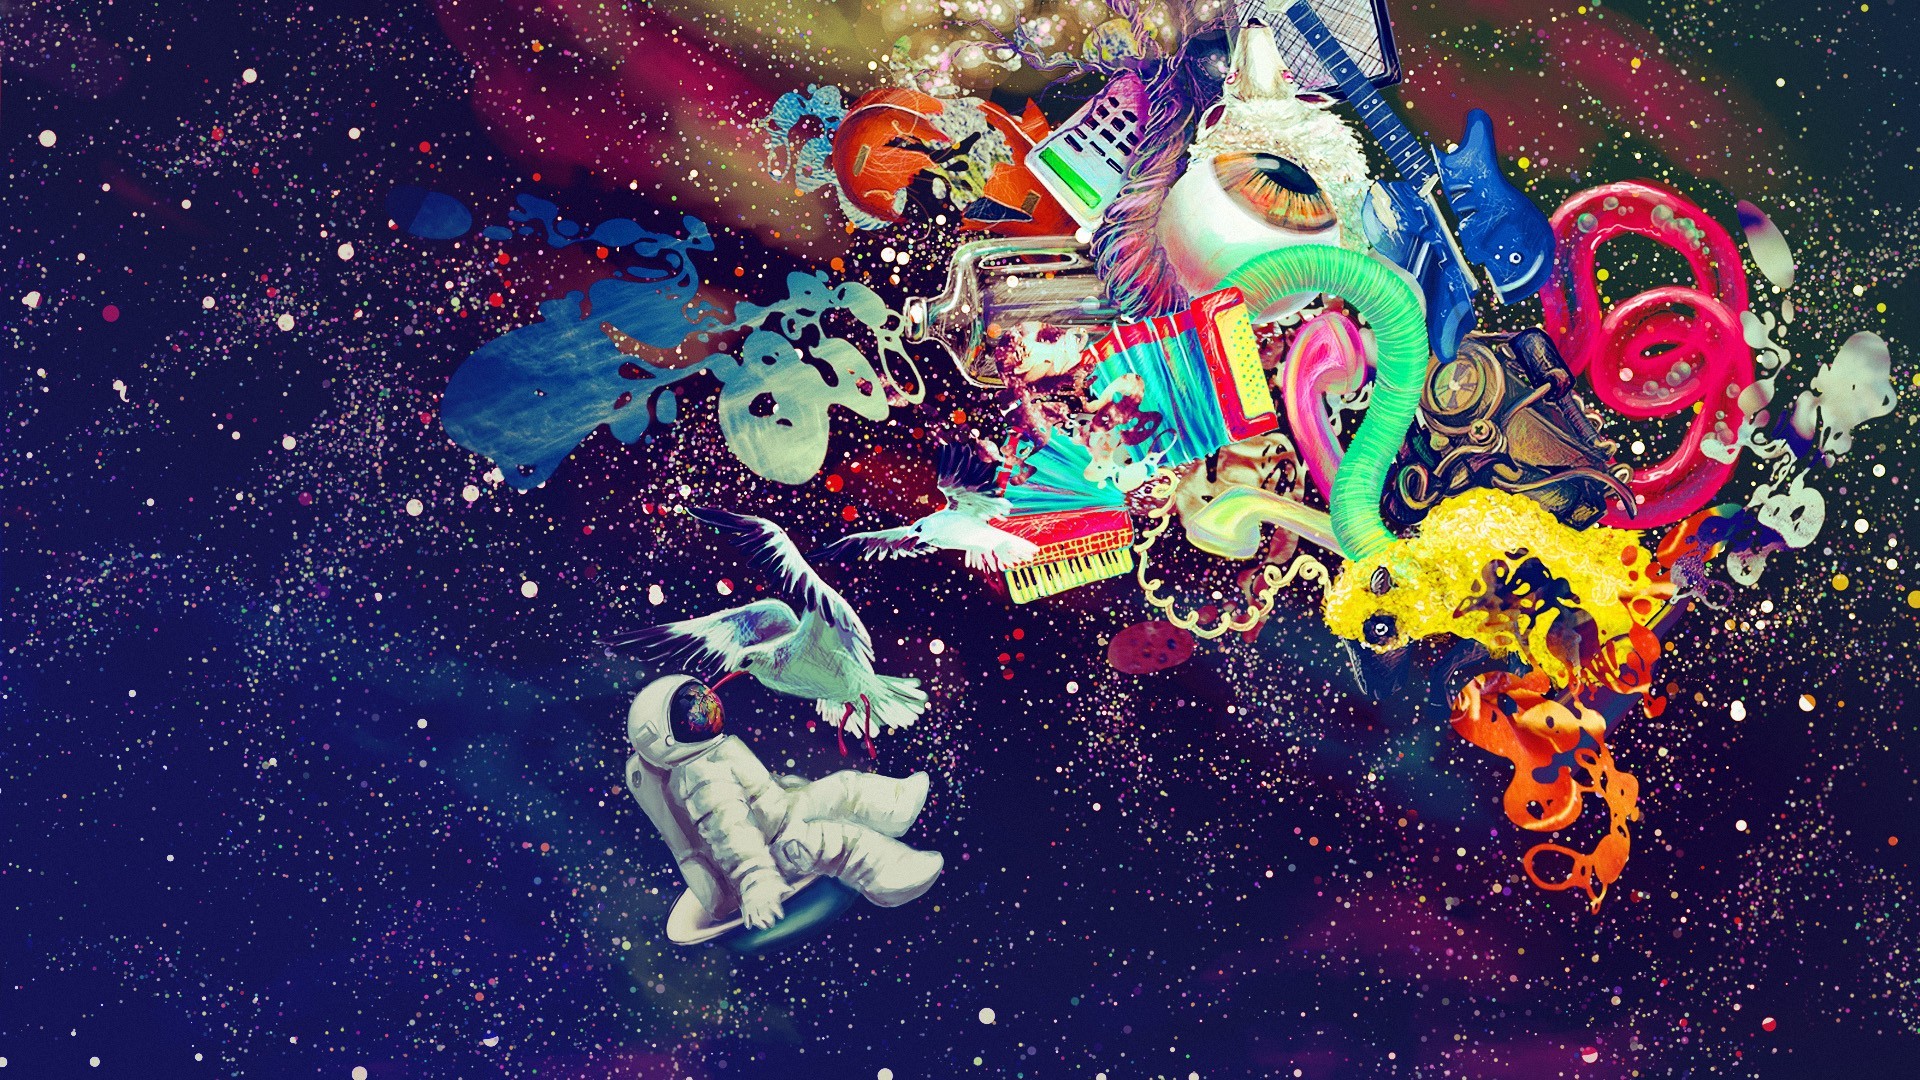 1920x1080 Images of Wallpapers Trippy Astronaut Surfer - #SC Soy solamente carne &  hueso. | AnimaciÃ³n y Dibujo | Pinterest .